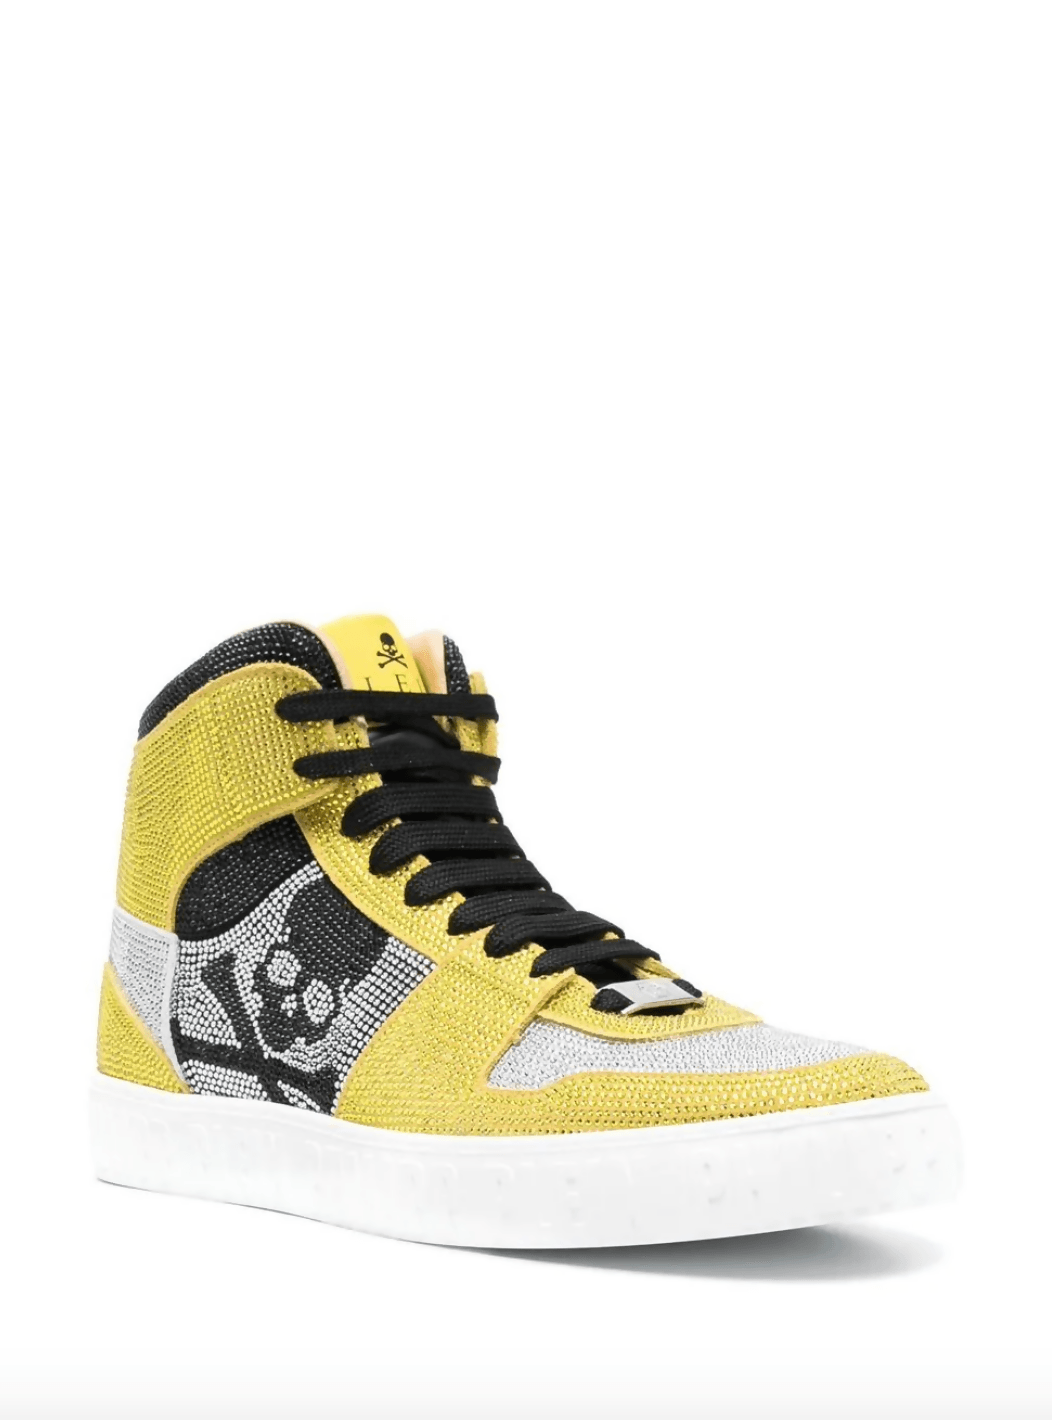 HI-TOP SNEAKERS NOTORIOUS CRYSTAL SKULL with Crystals